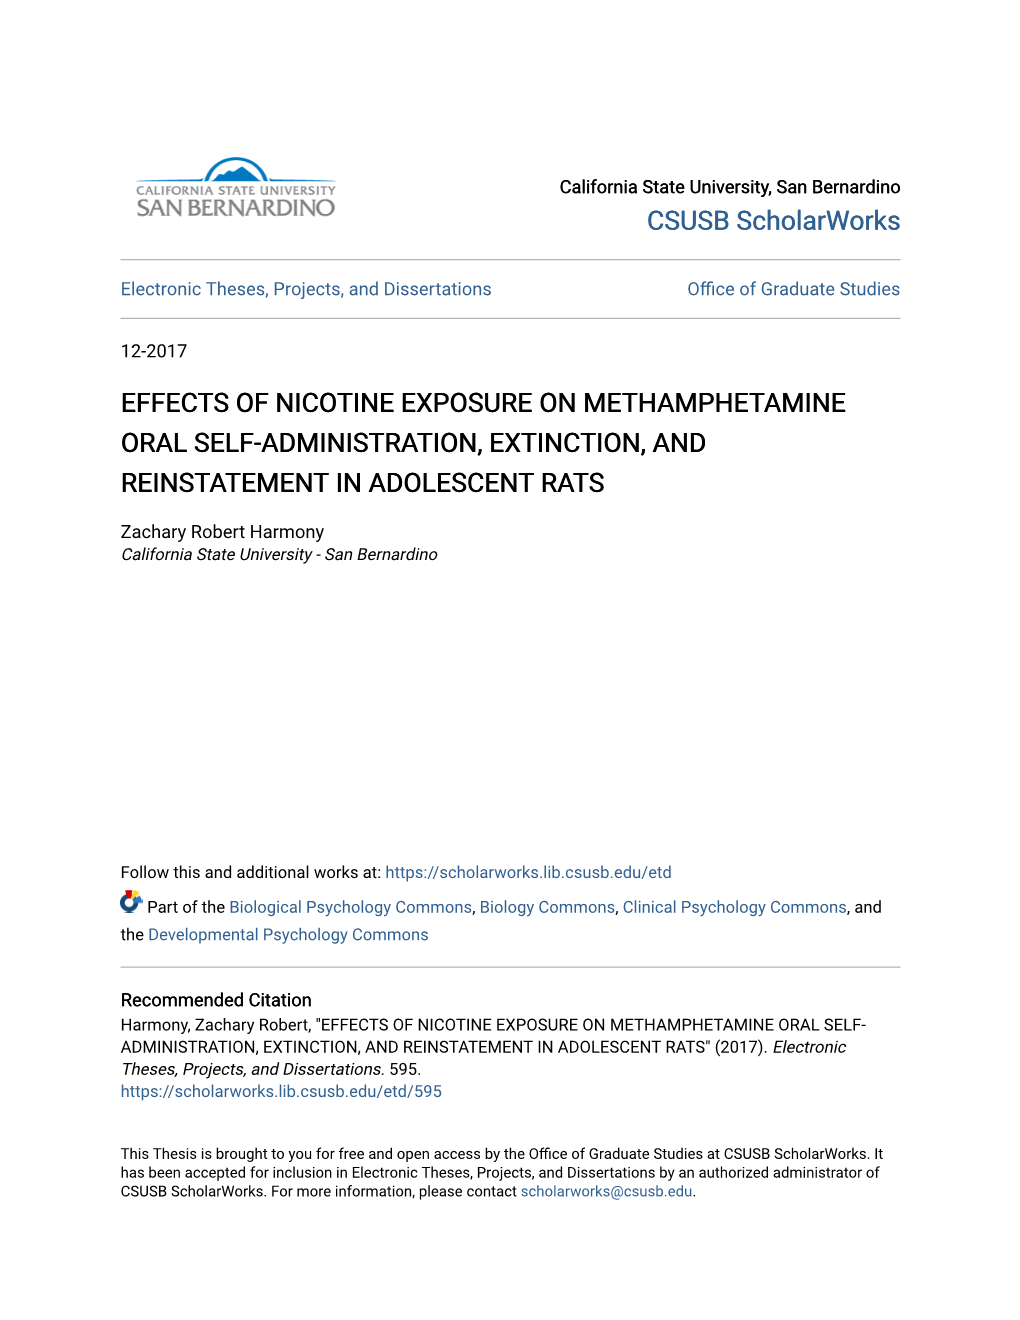 Effects of Nicotine Exposure on Methamphetamine Oral Self-Administration, Extinction, and Reinstatement in Adolescent Rats